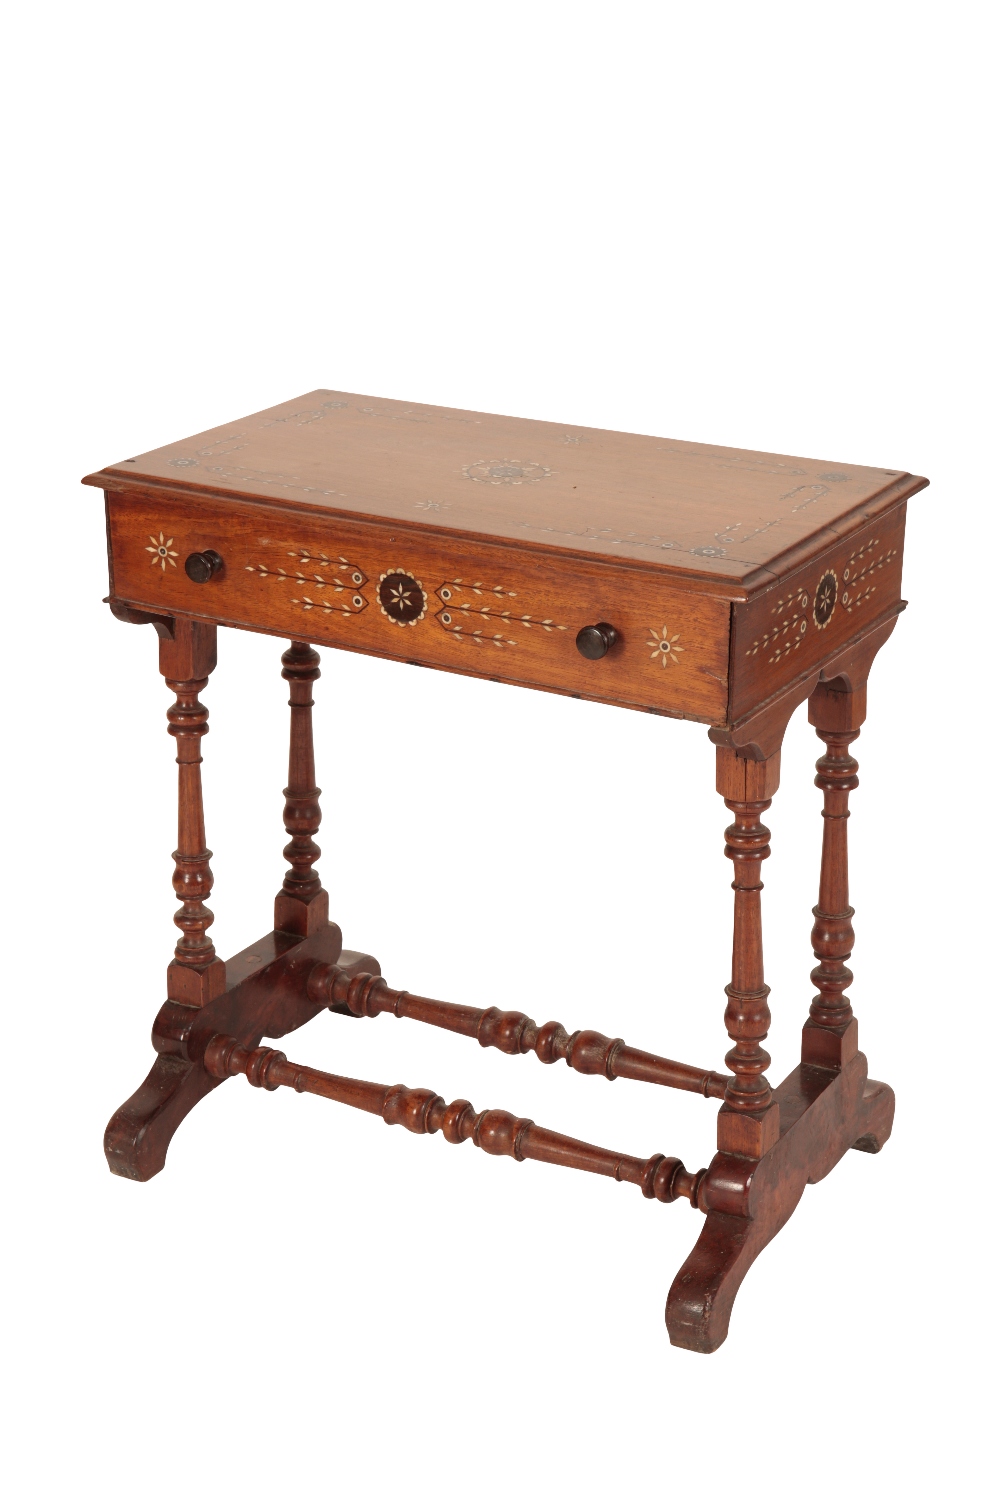 COLONIAL HARDWOOD SIDE TABLE